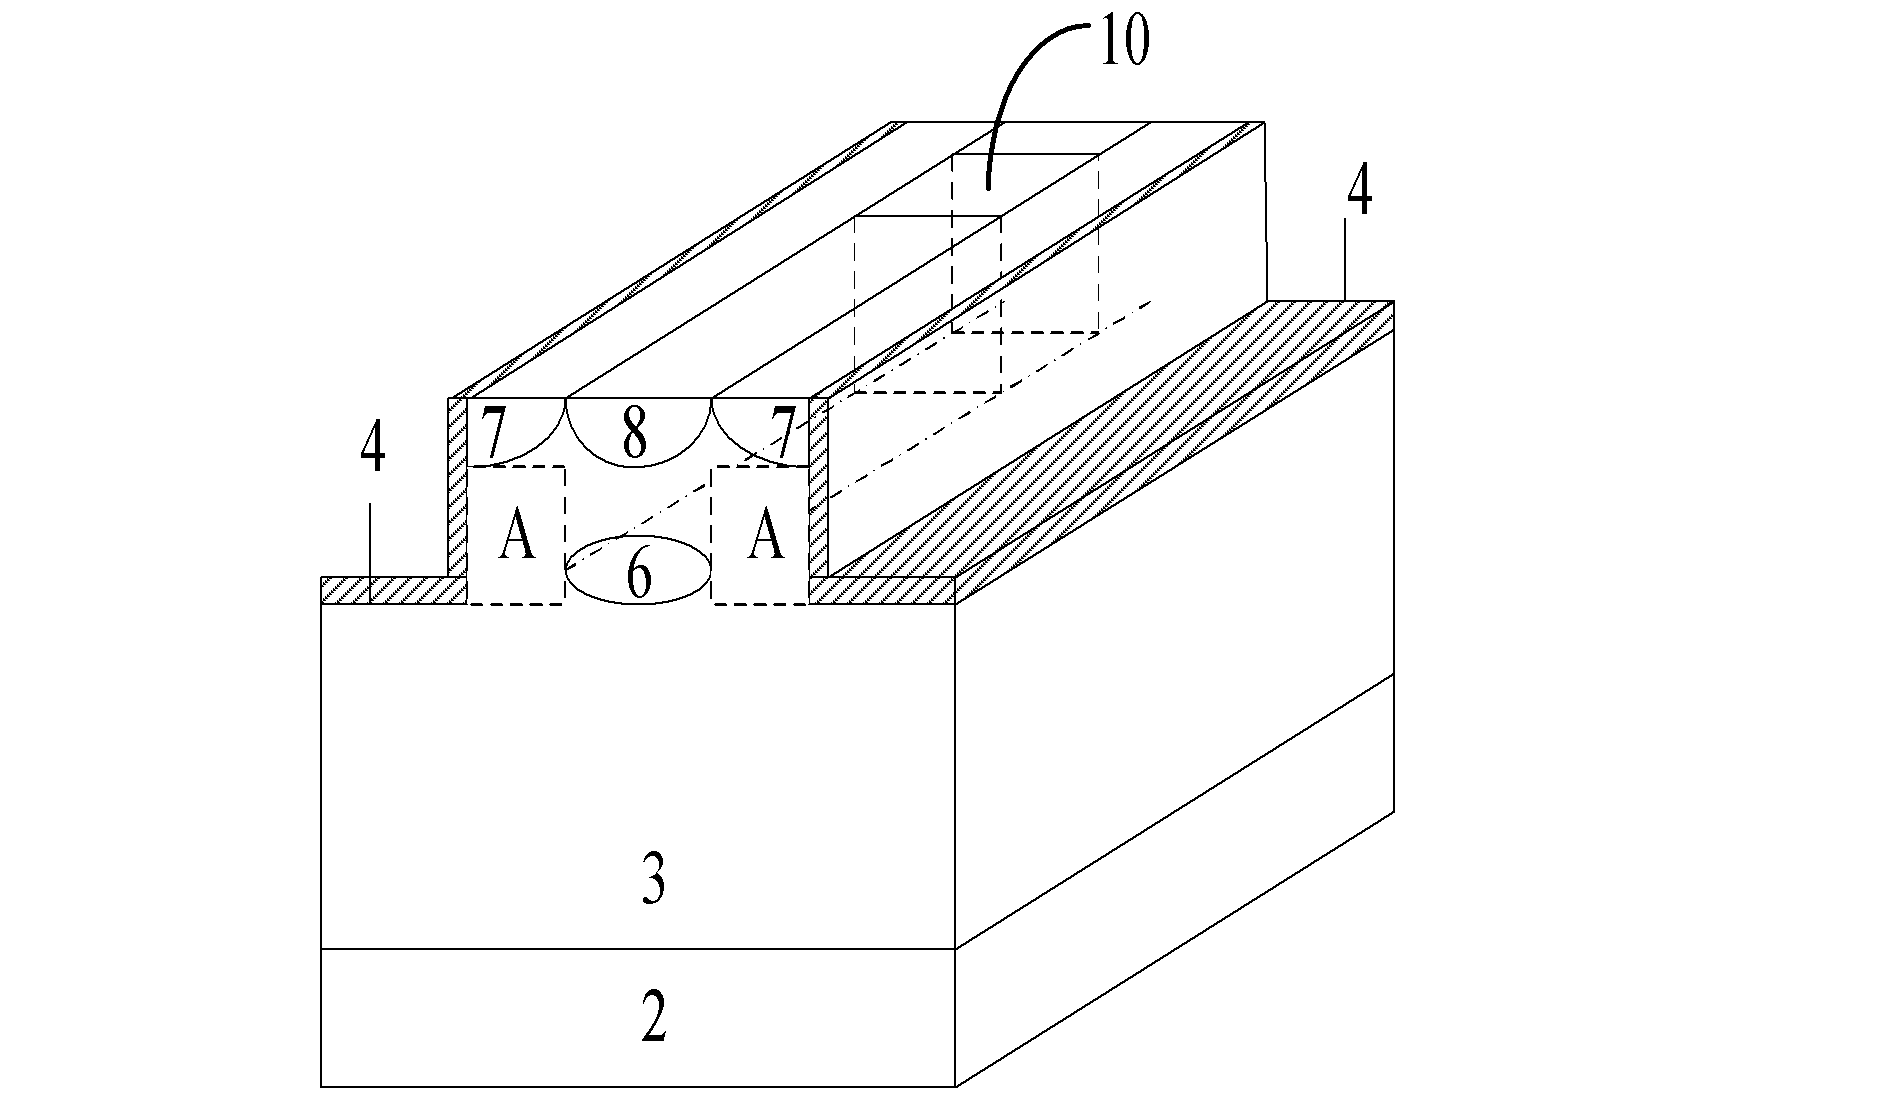 Accumulation type grooved-gate diode